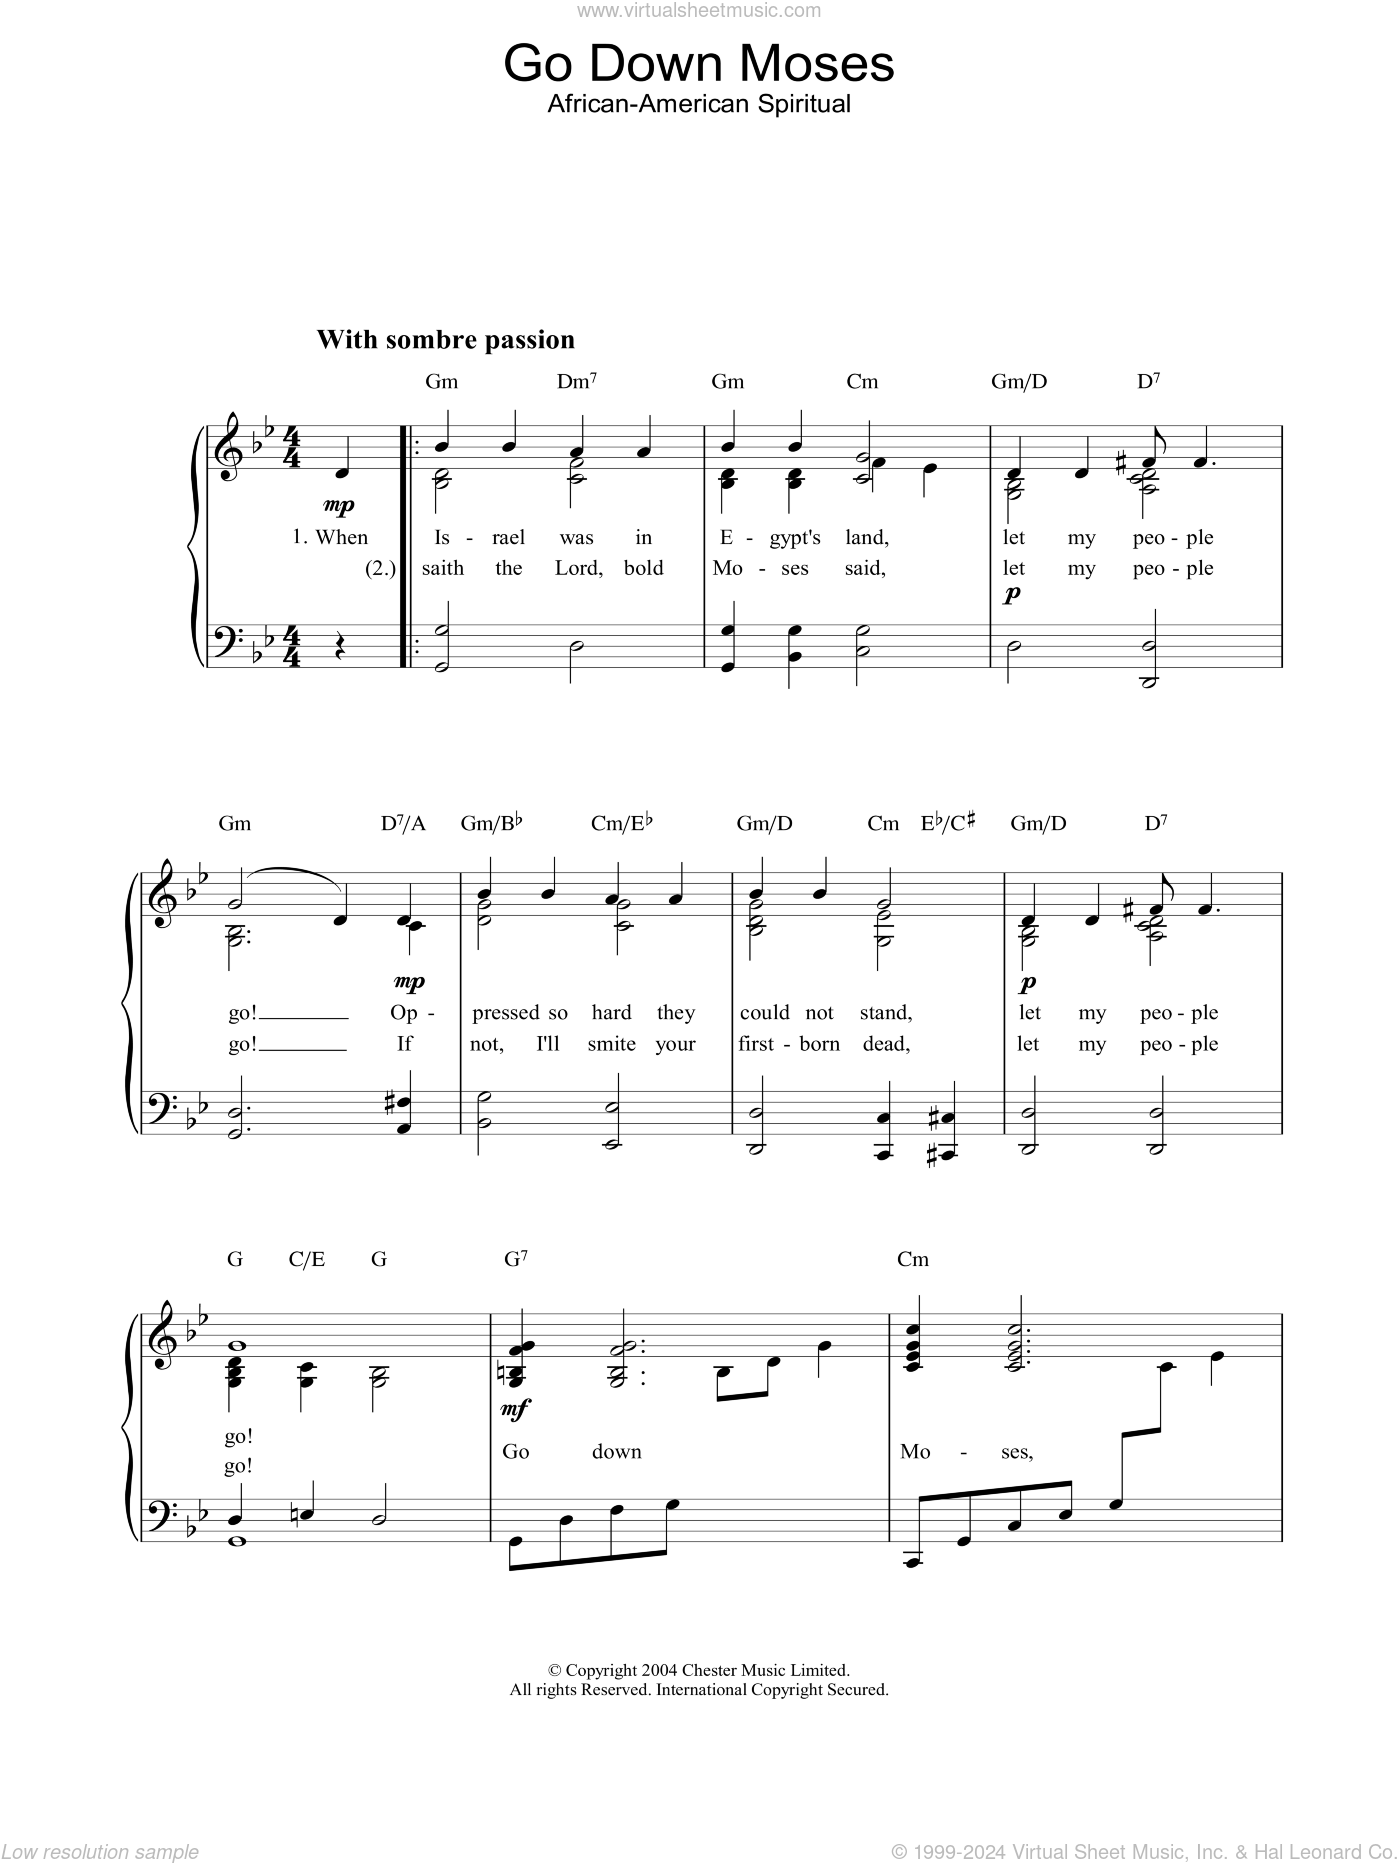 Go Down Moses sheet music for piano solo (PDF)